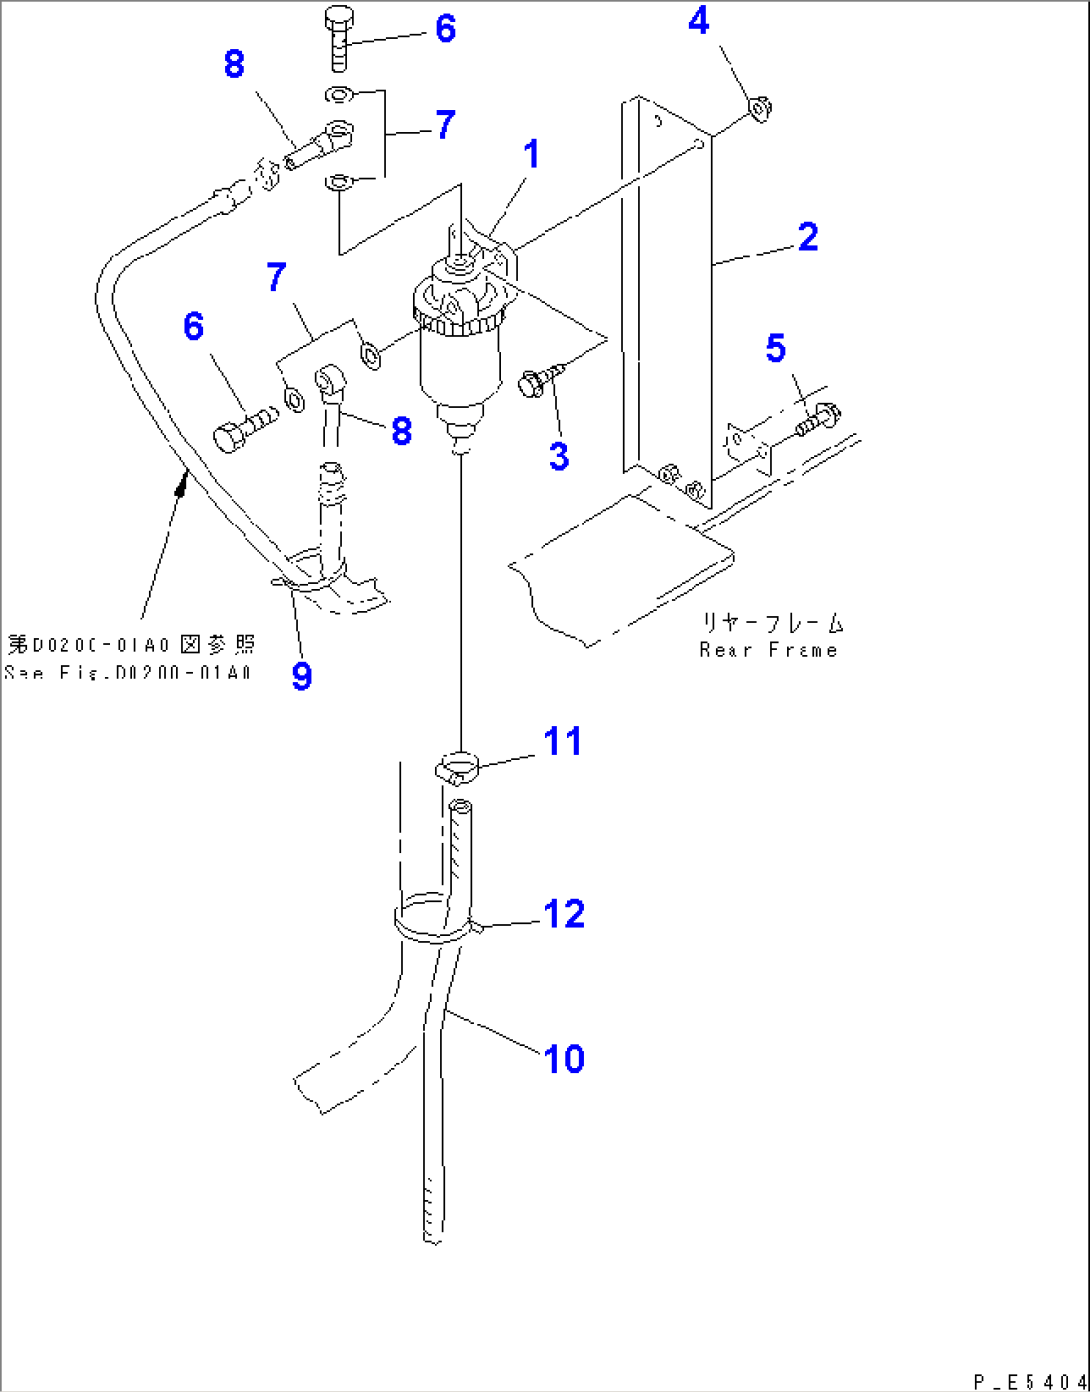 FUEL LINE (WATER SEPARATOR AND PIPING)